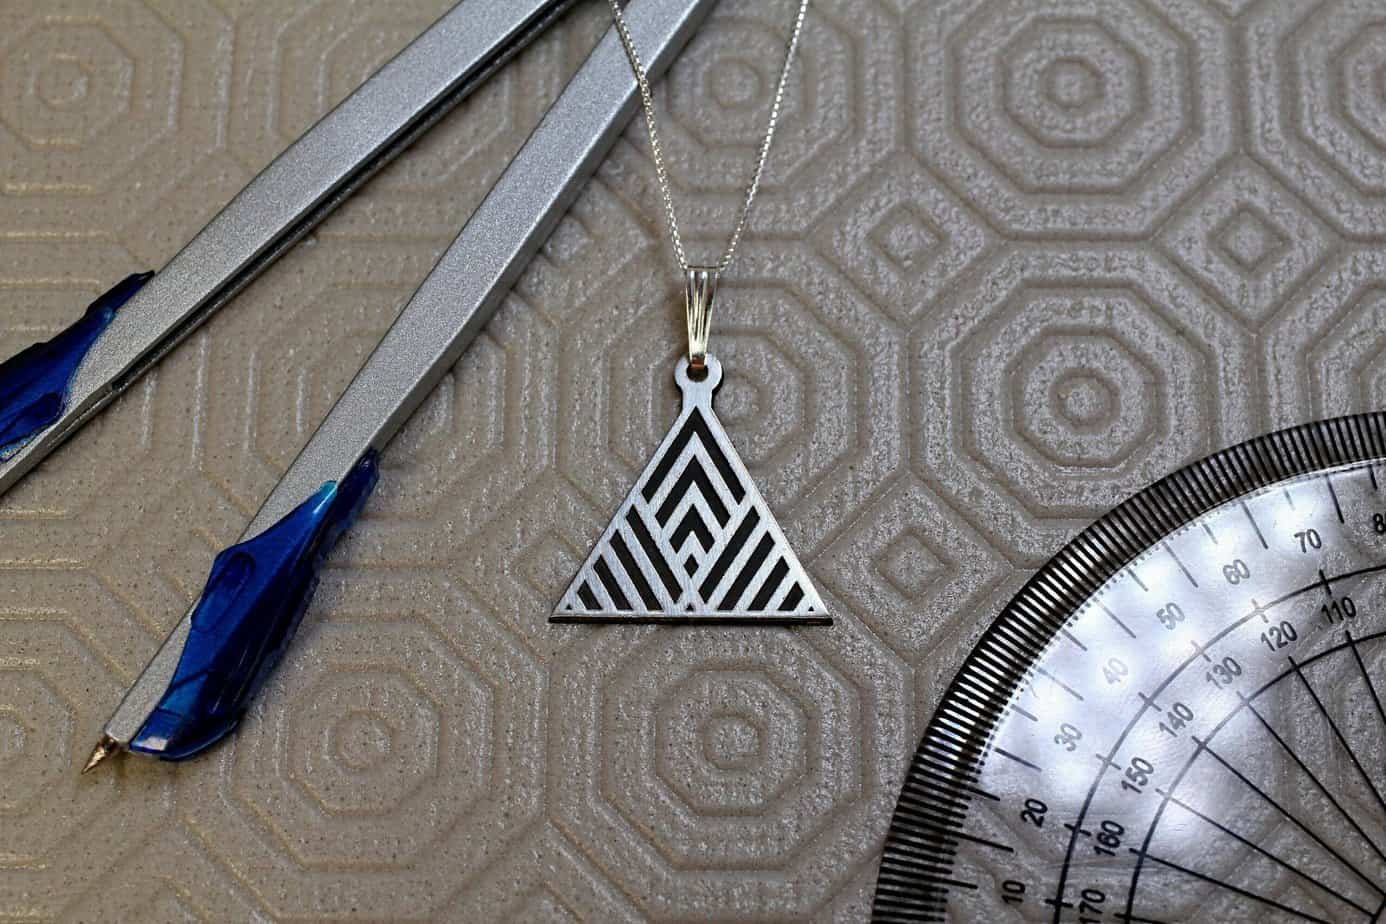 Triangle necklace for men, groomsmen gift, men’s necklace with a silver triangle pendant, silver chain, gift for him, geometric necklace